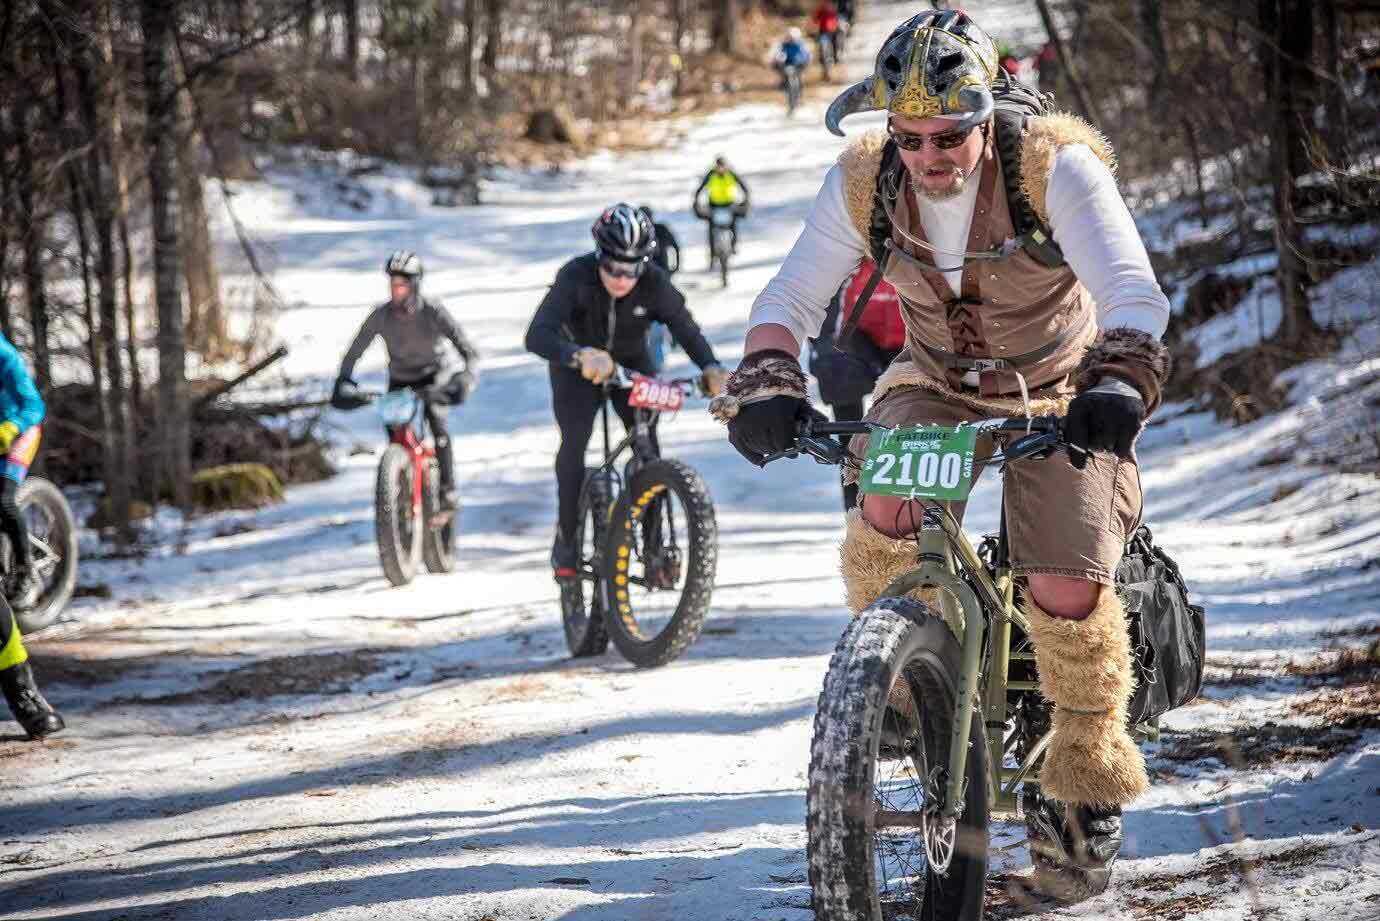 Cyclists ride up an icy road on fat bikes  in the woods with front cyclist wearing viking clothing